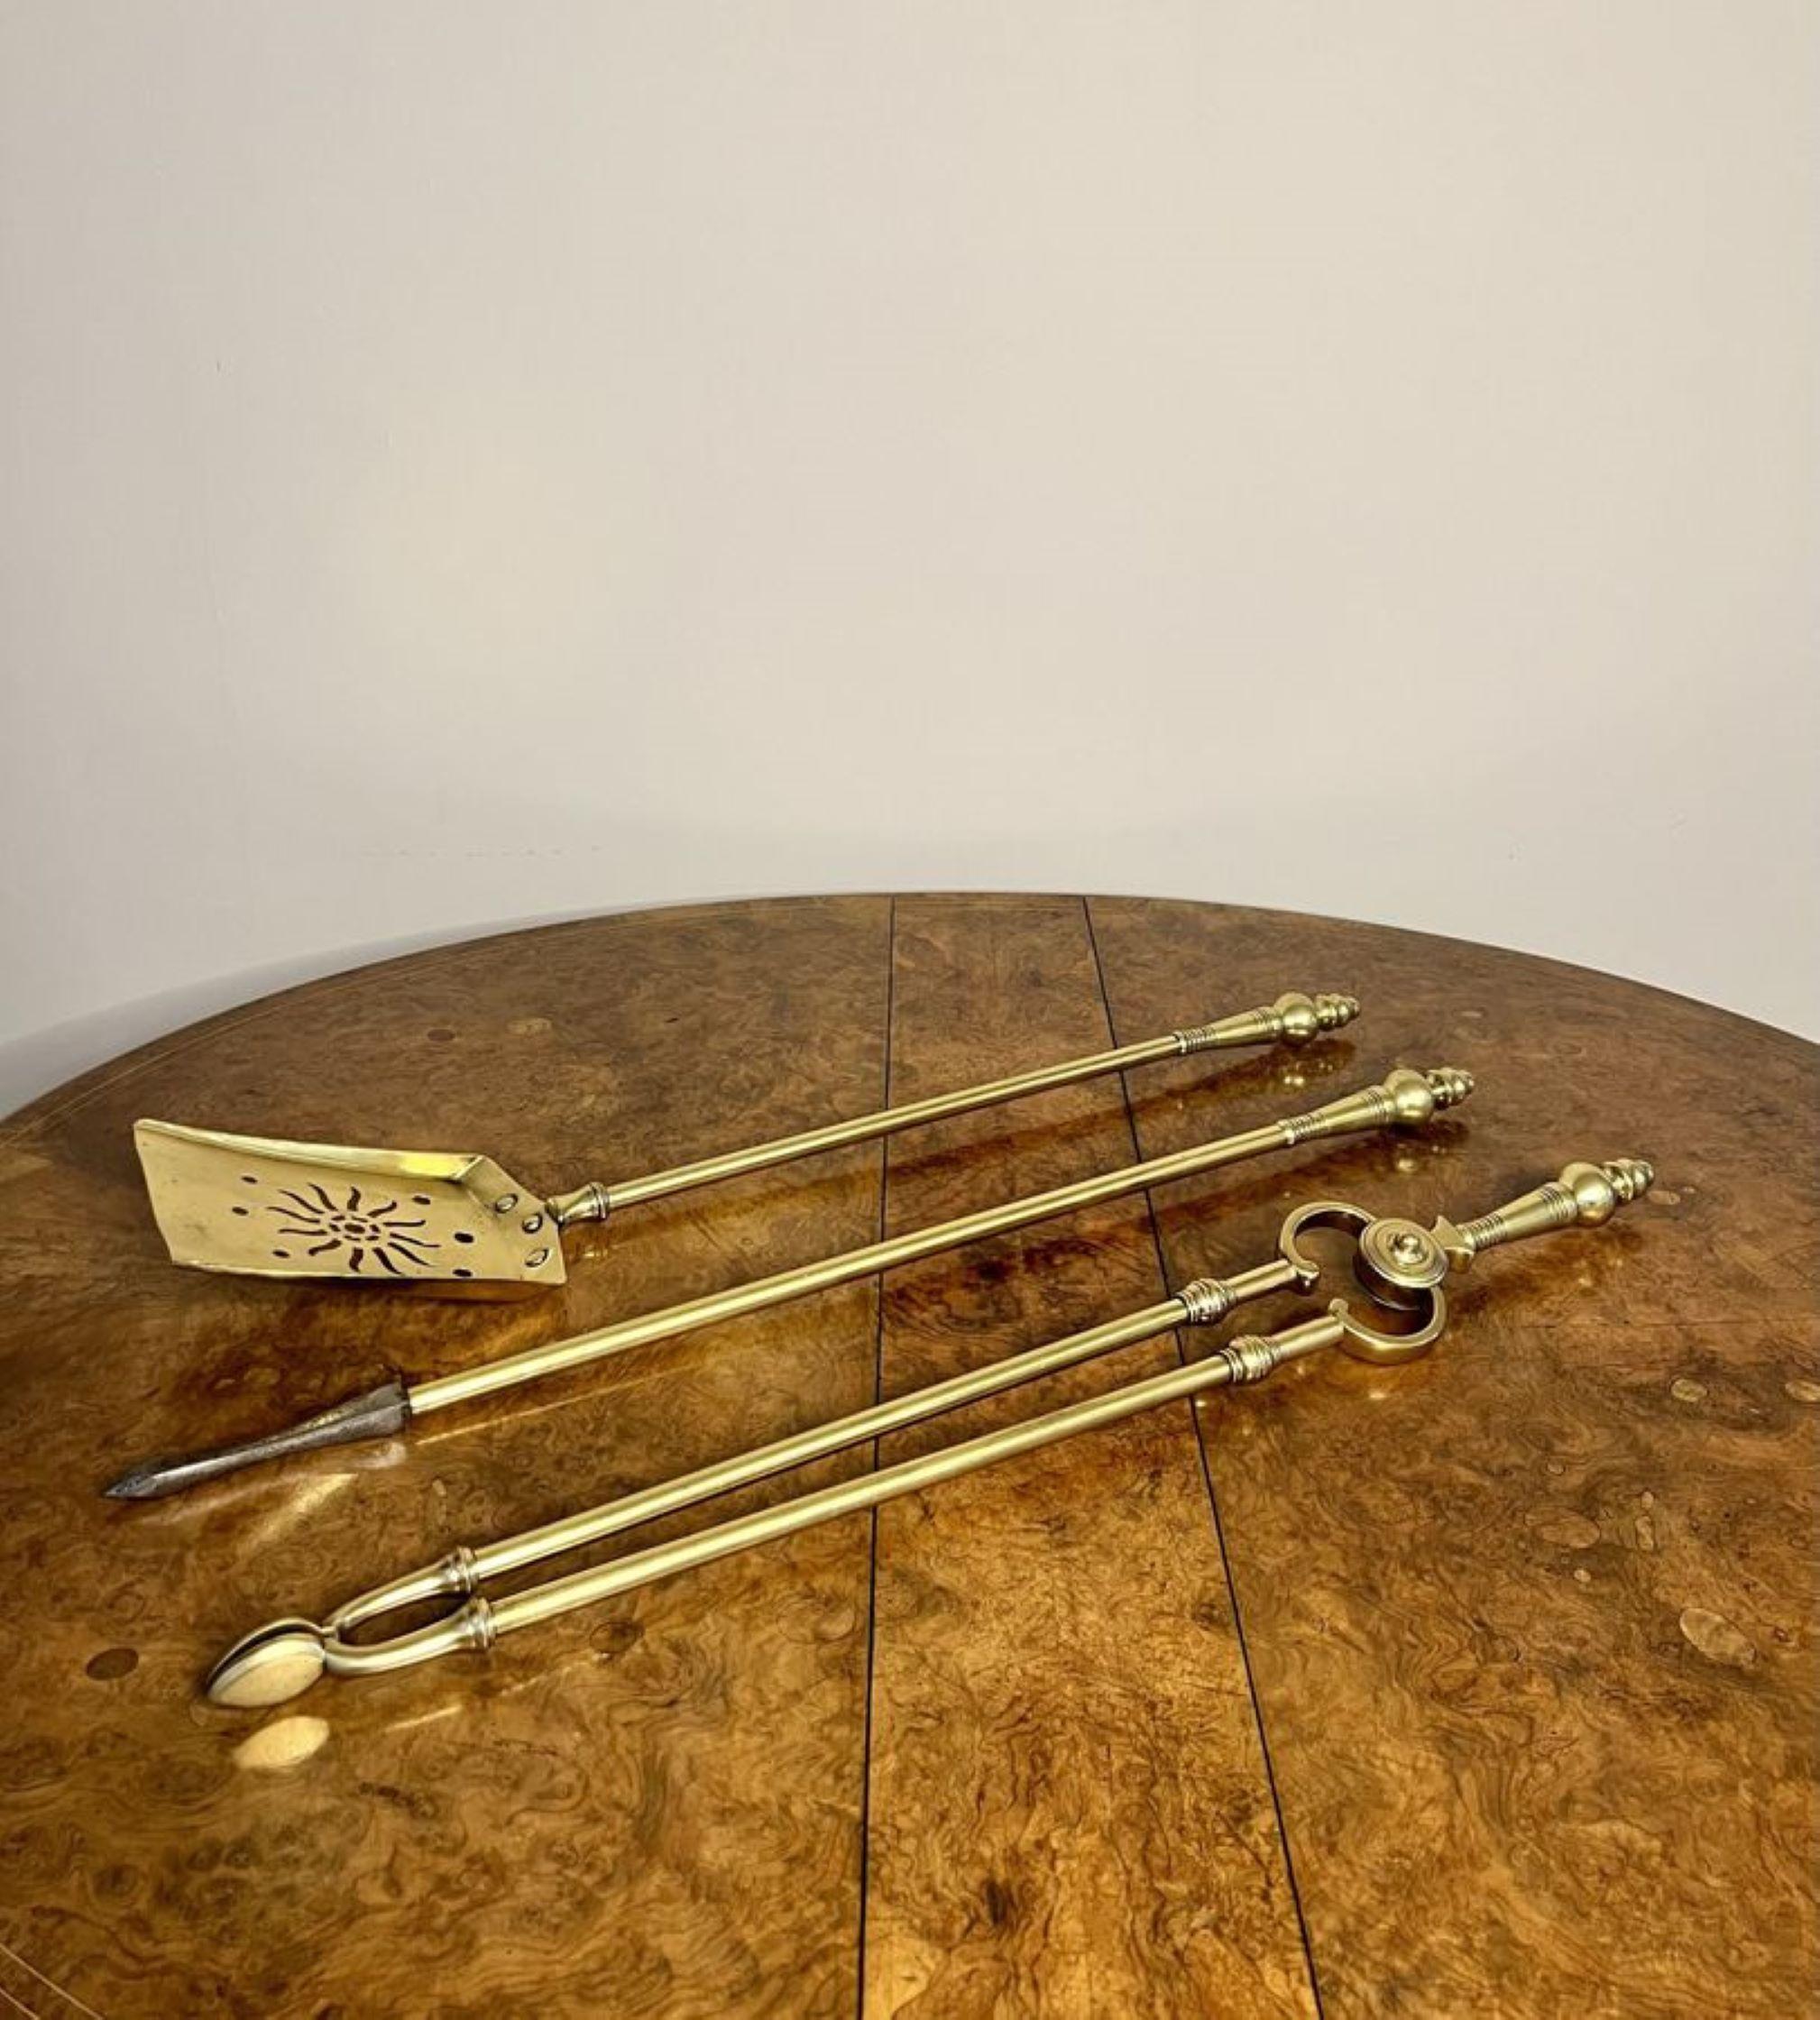 Quality antique Edwardian brass fire irons having a quality set of fire irons with circular detailed handles consisting of a shovel, poker and a pair of tongs.

D. 1900